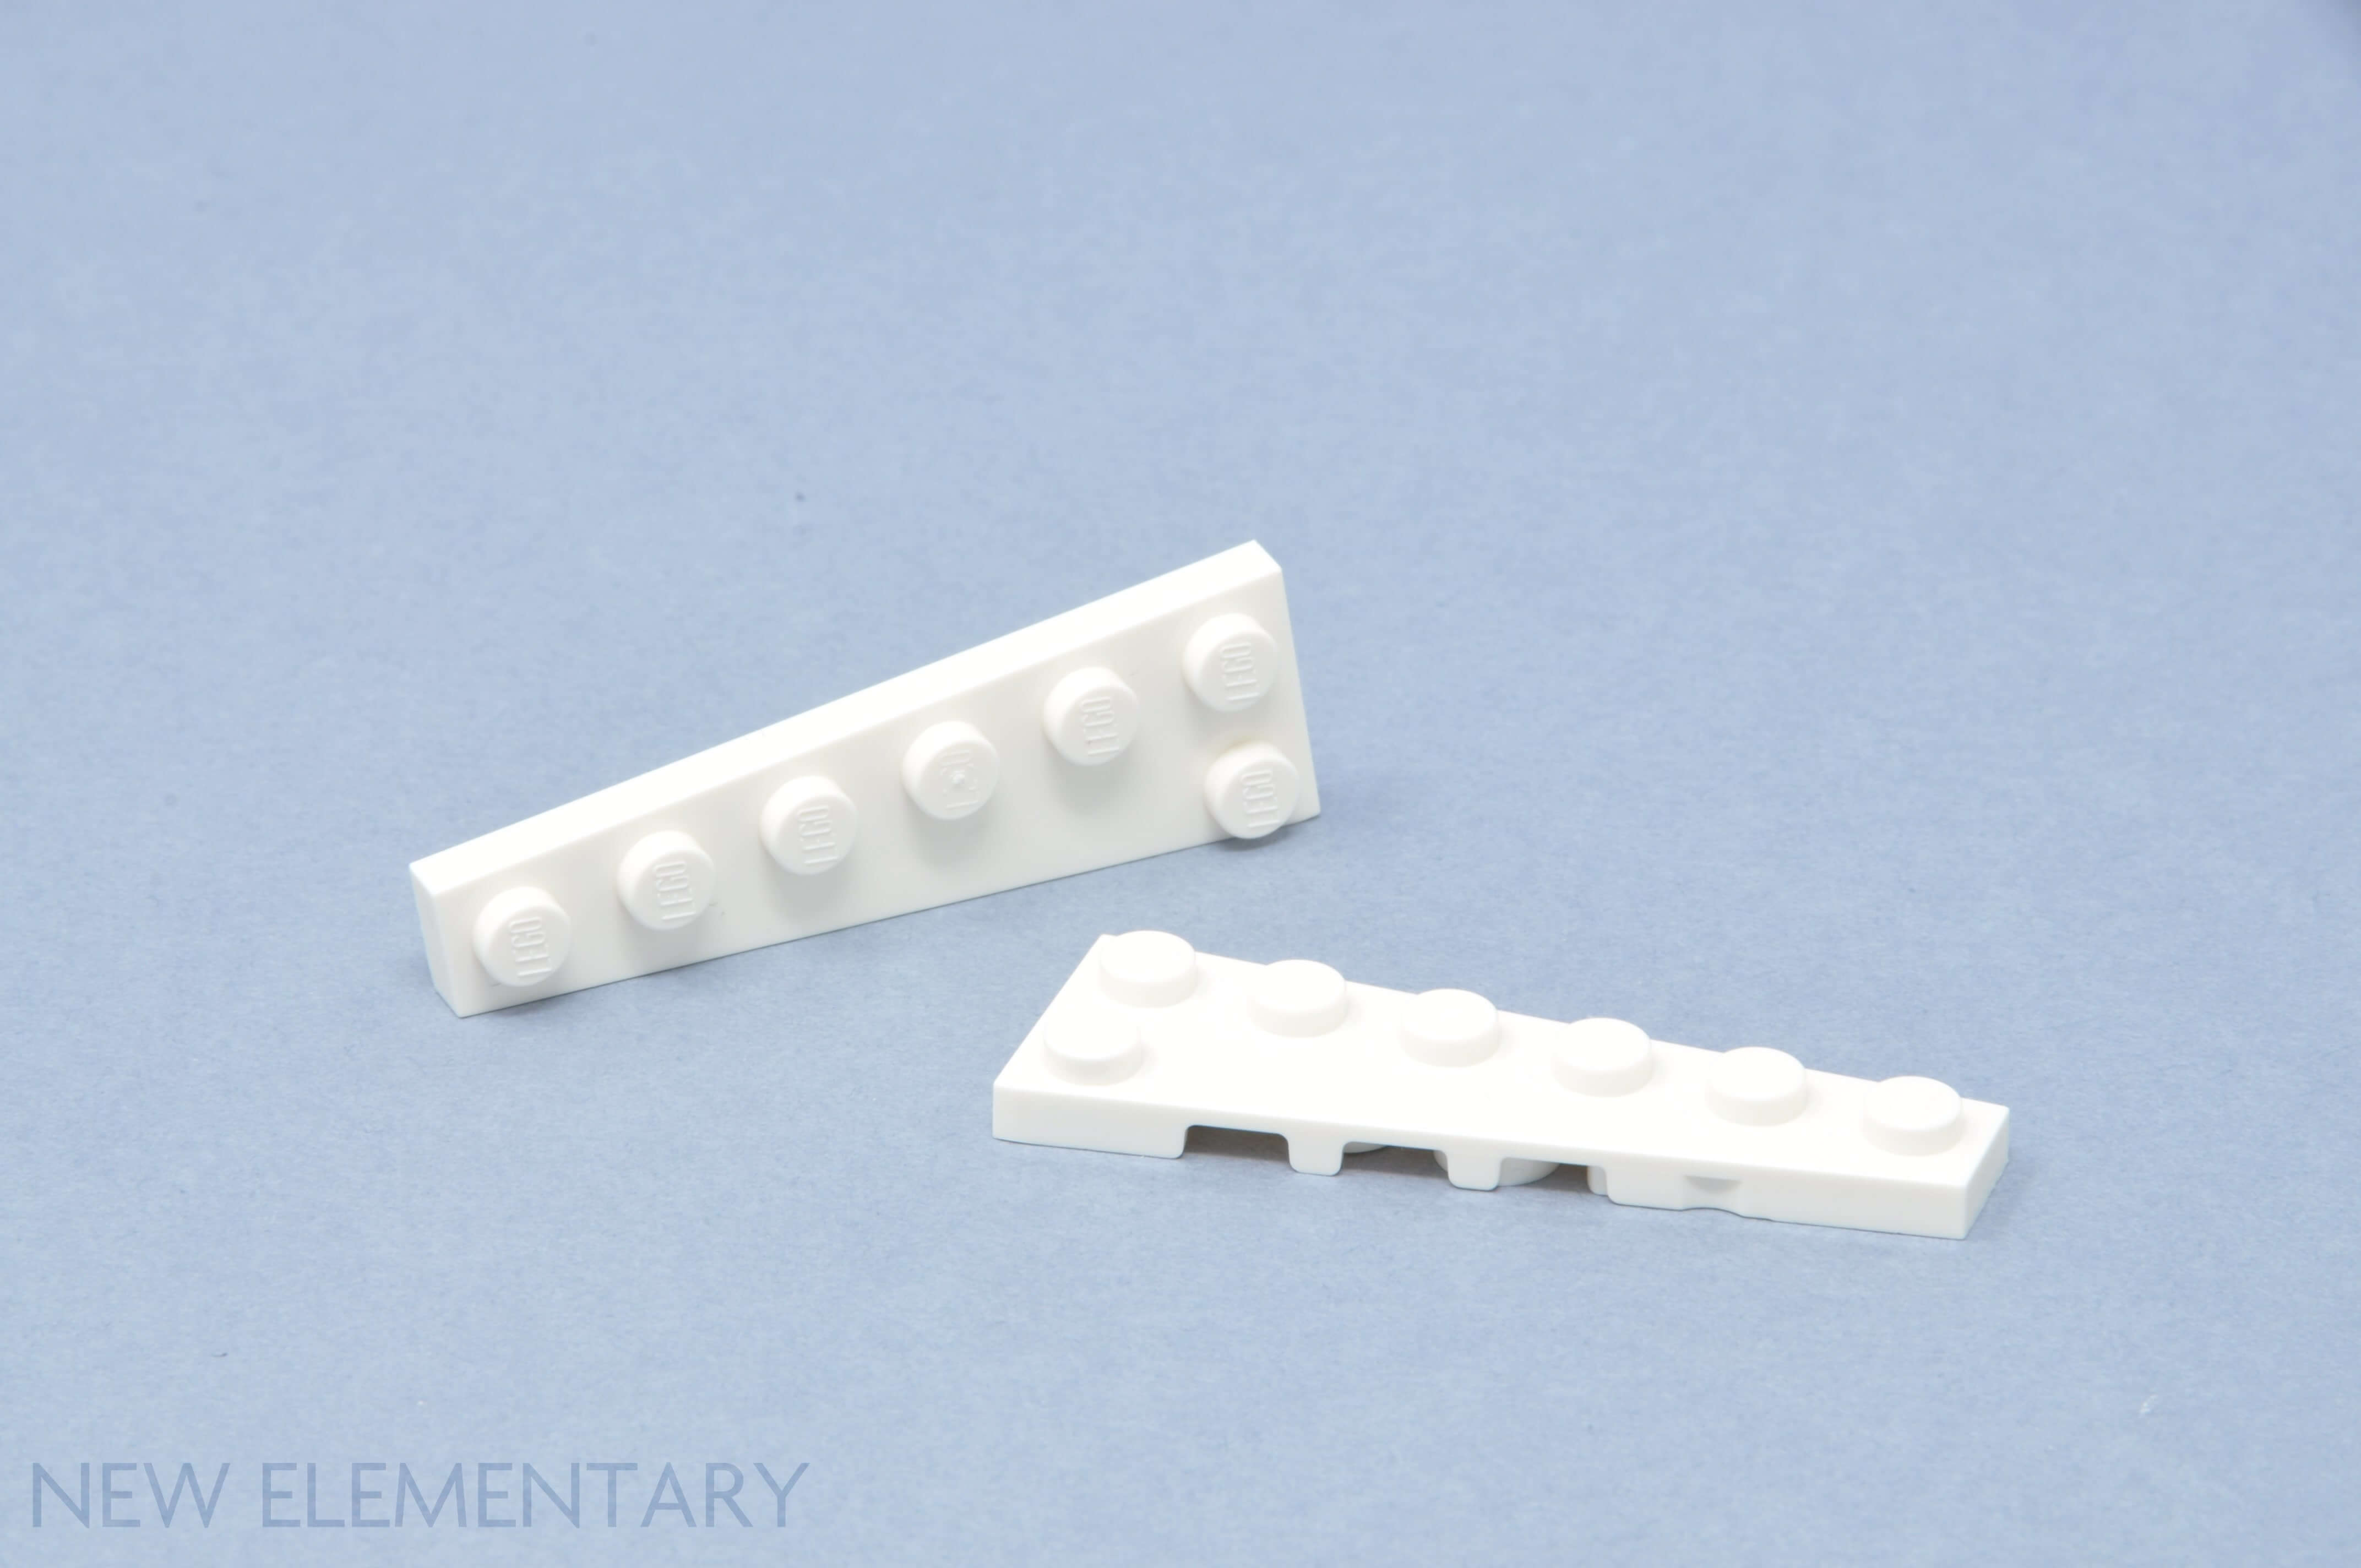 Lego 50 New White Wedges Plates 3 x 2 Parts 25 Left and 25 Right Pieces 